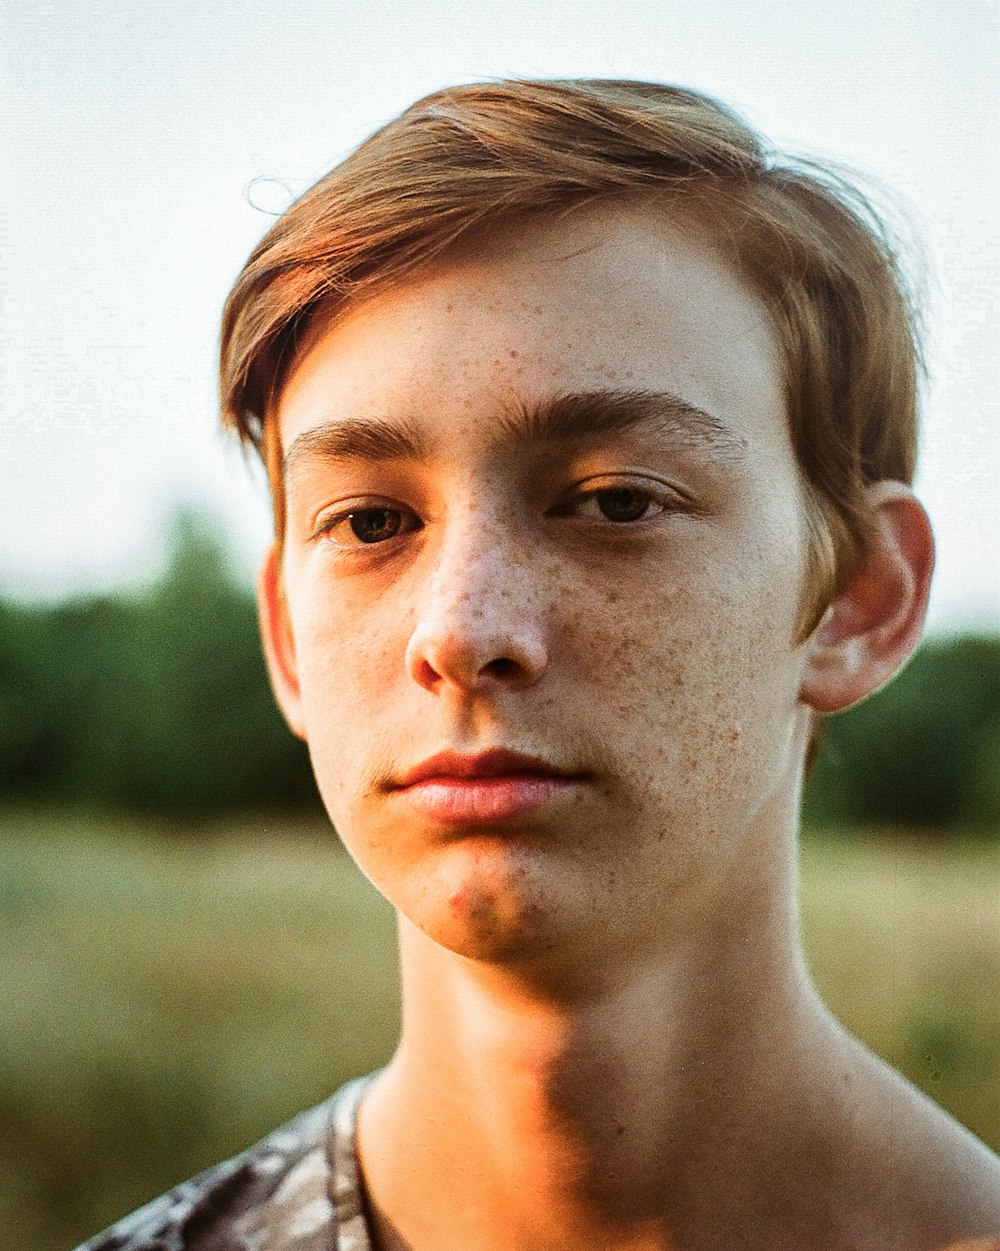 a young man with freckles on his face